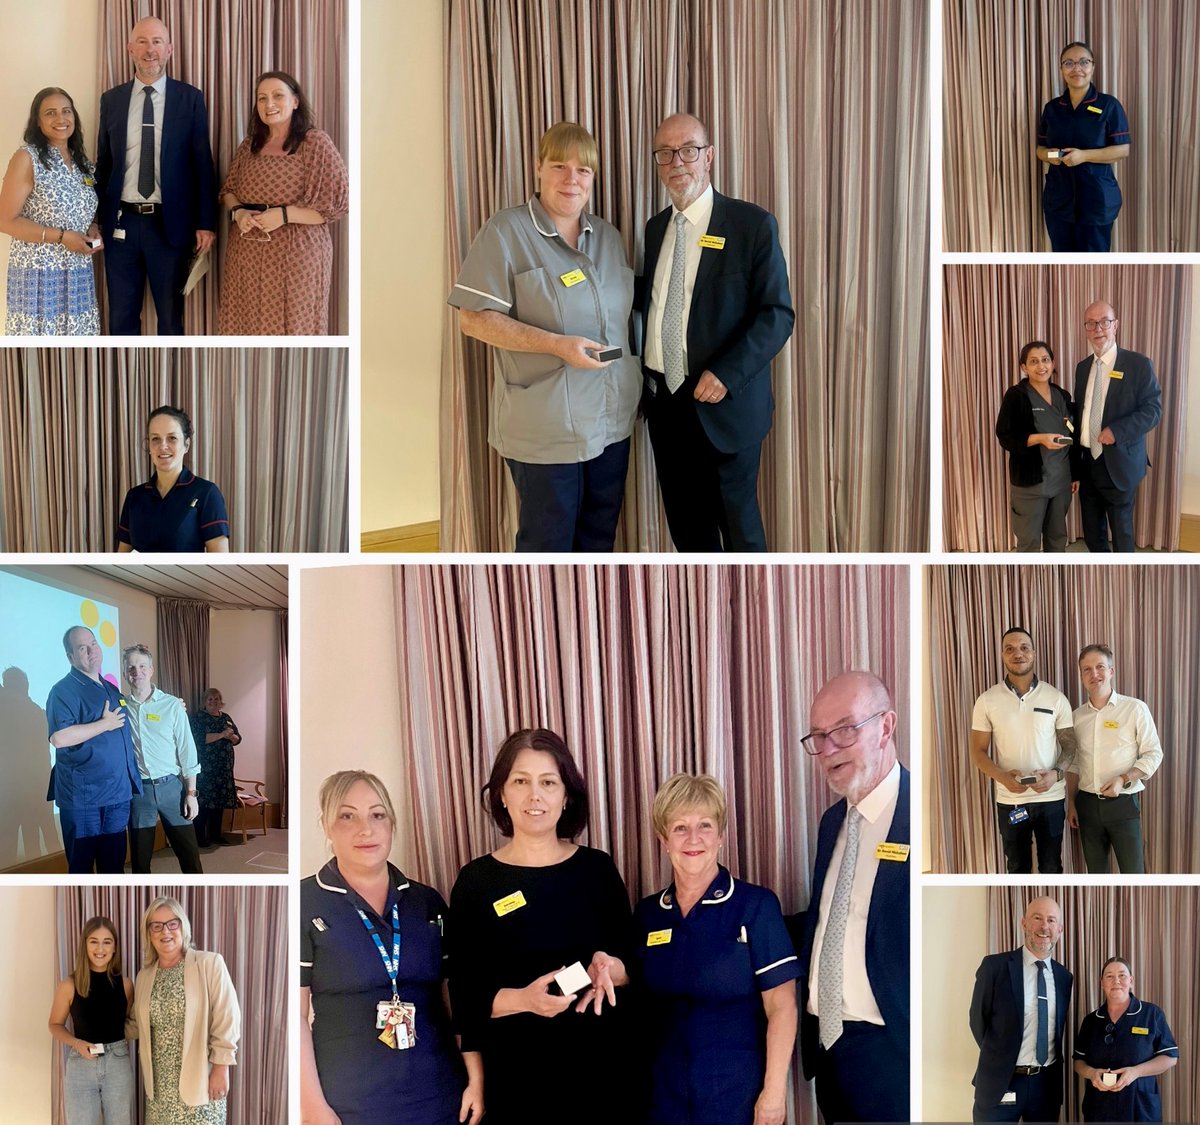 We held two special ceremonies today recognising our nurses and midwives for their dedication & commitment to our Trust values - #ambition #respect & #compassion. Over 150 were shortlisted – you can find out who picked up an award here: swbh.nhs.uk/news/nurses-an…